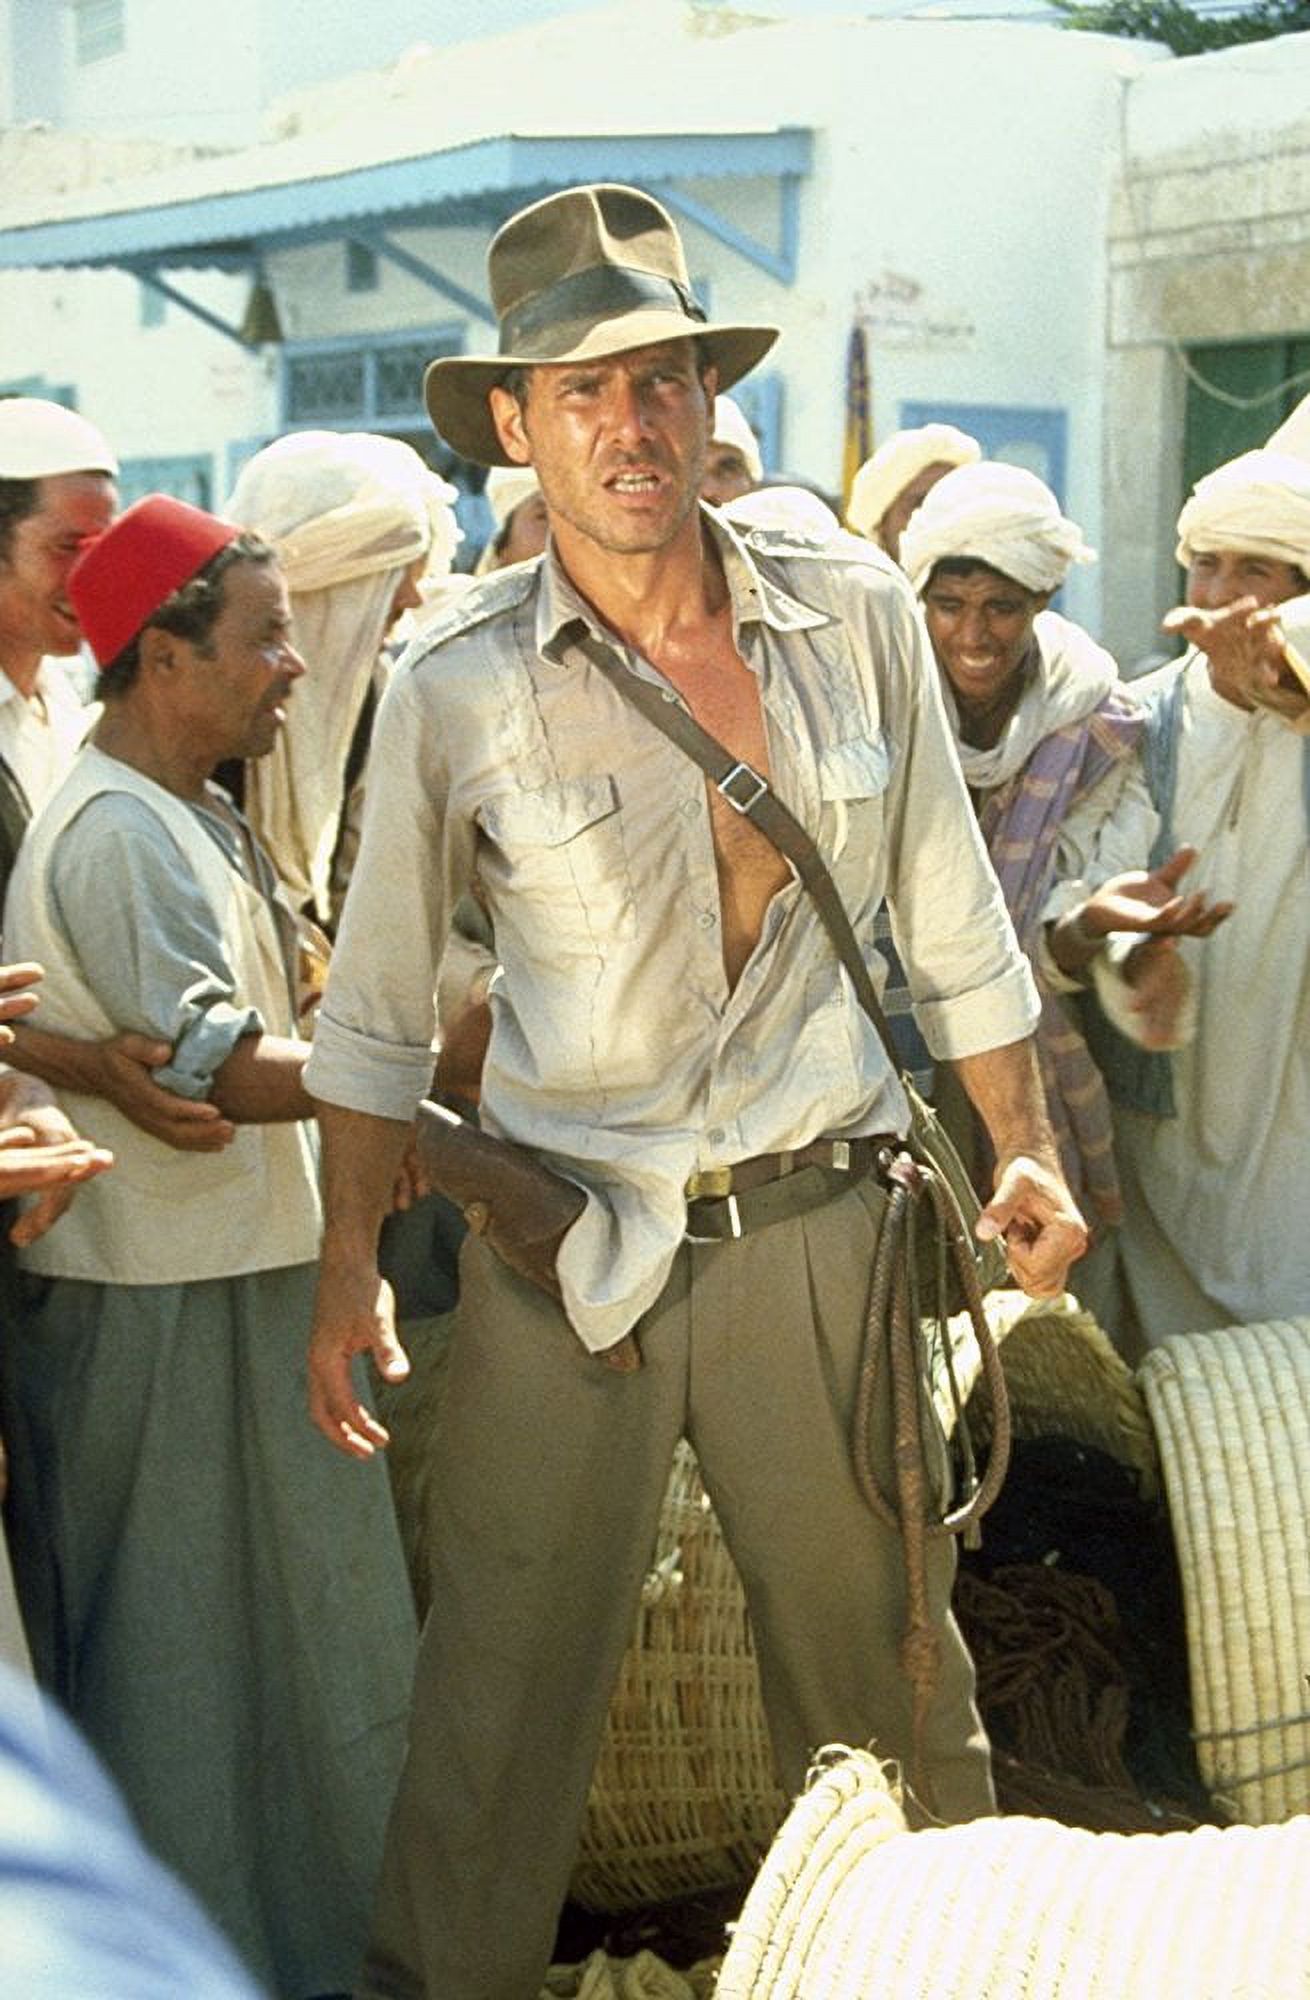 Indiana Jones and the Raiders of the Lost Ark (Blu-ray) - image 4 of 5